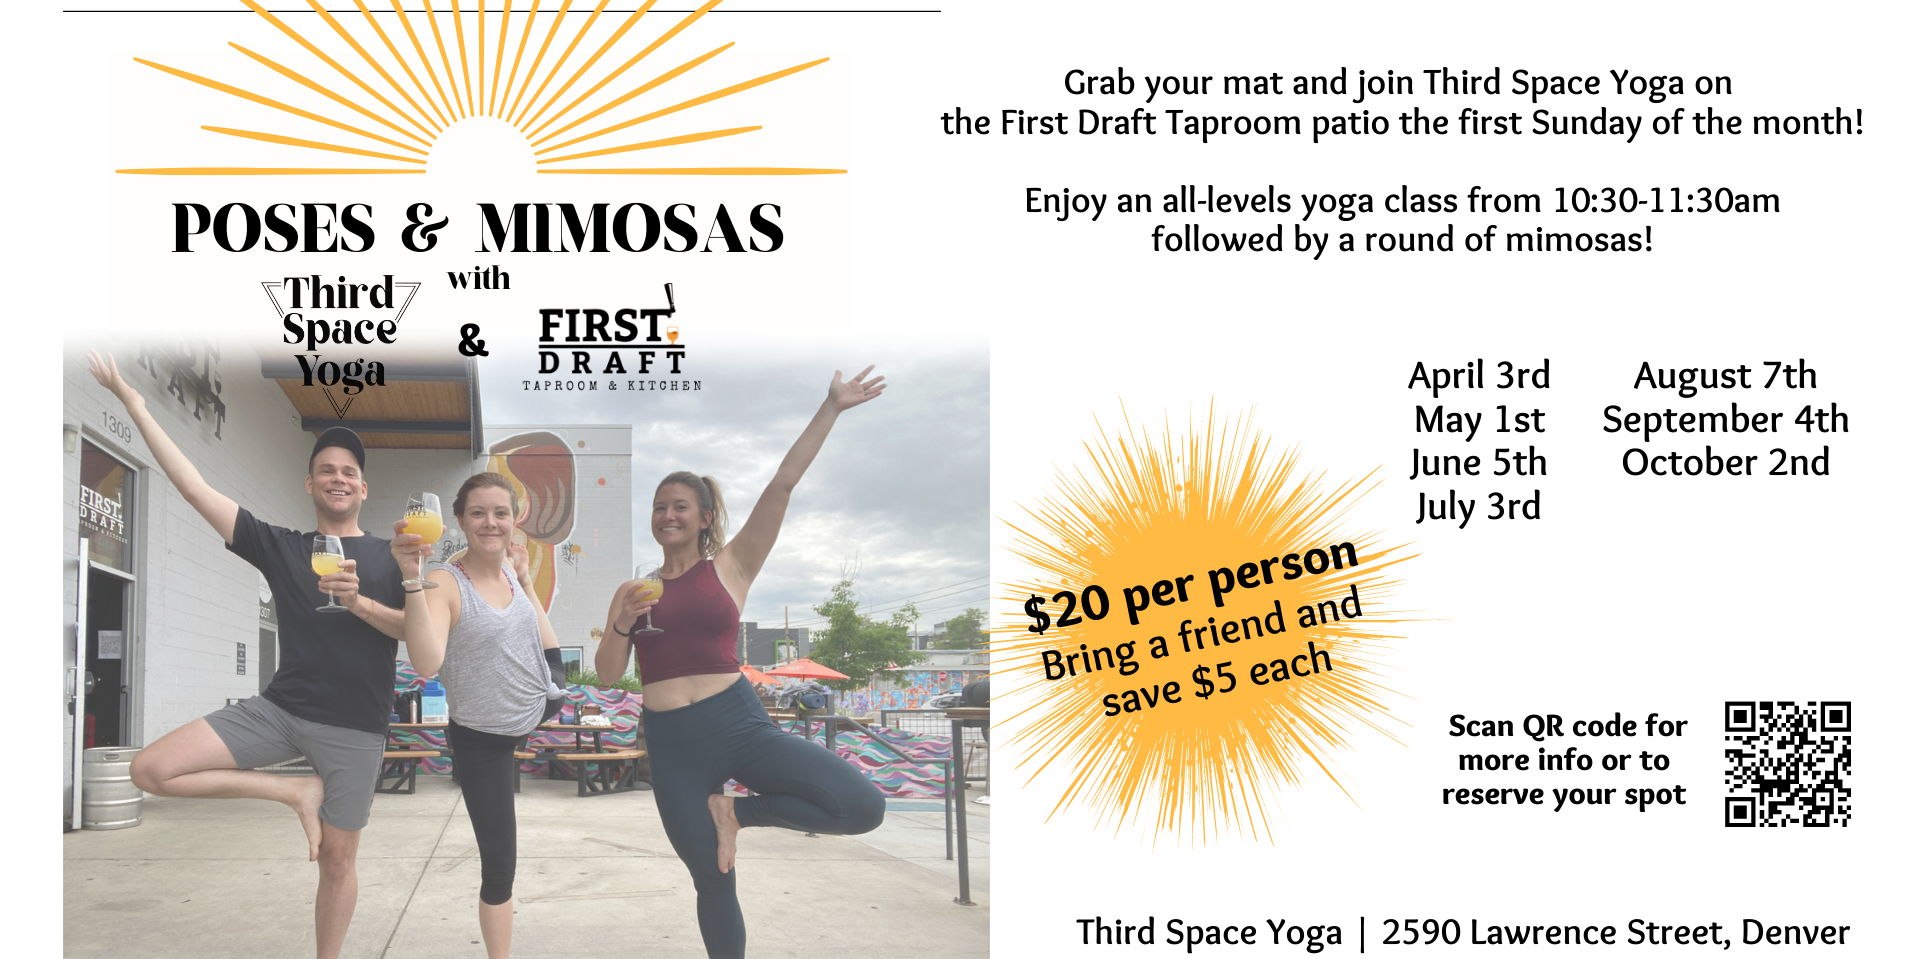 Poses and Mimosas presented by Third Space Yoga promotional image